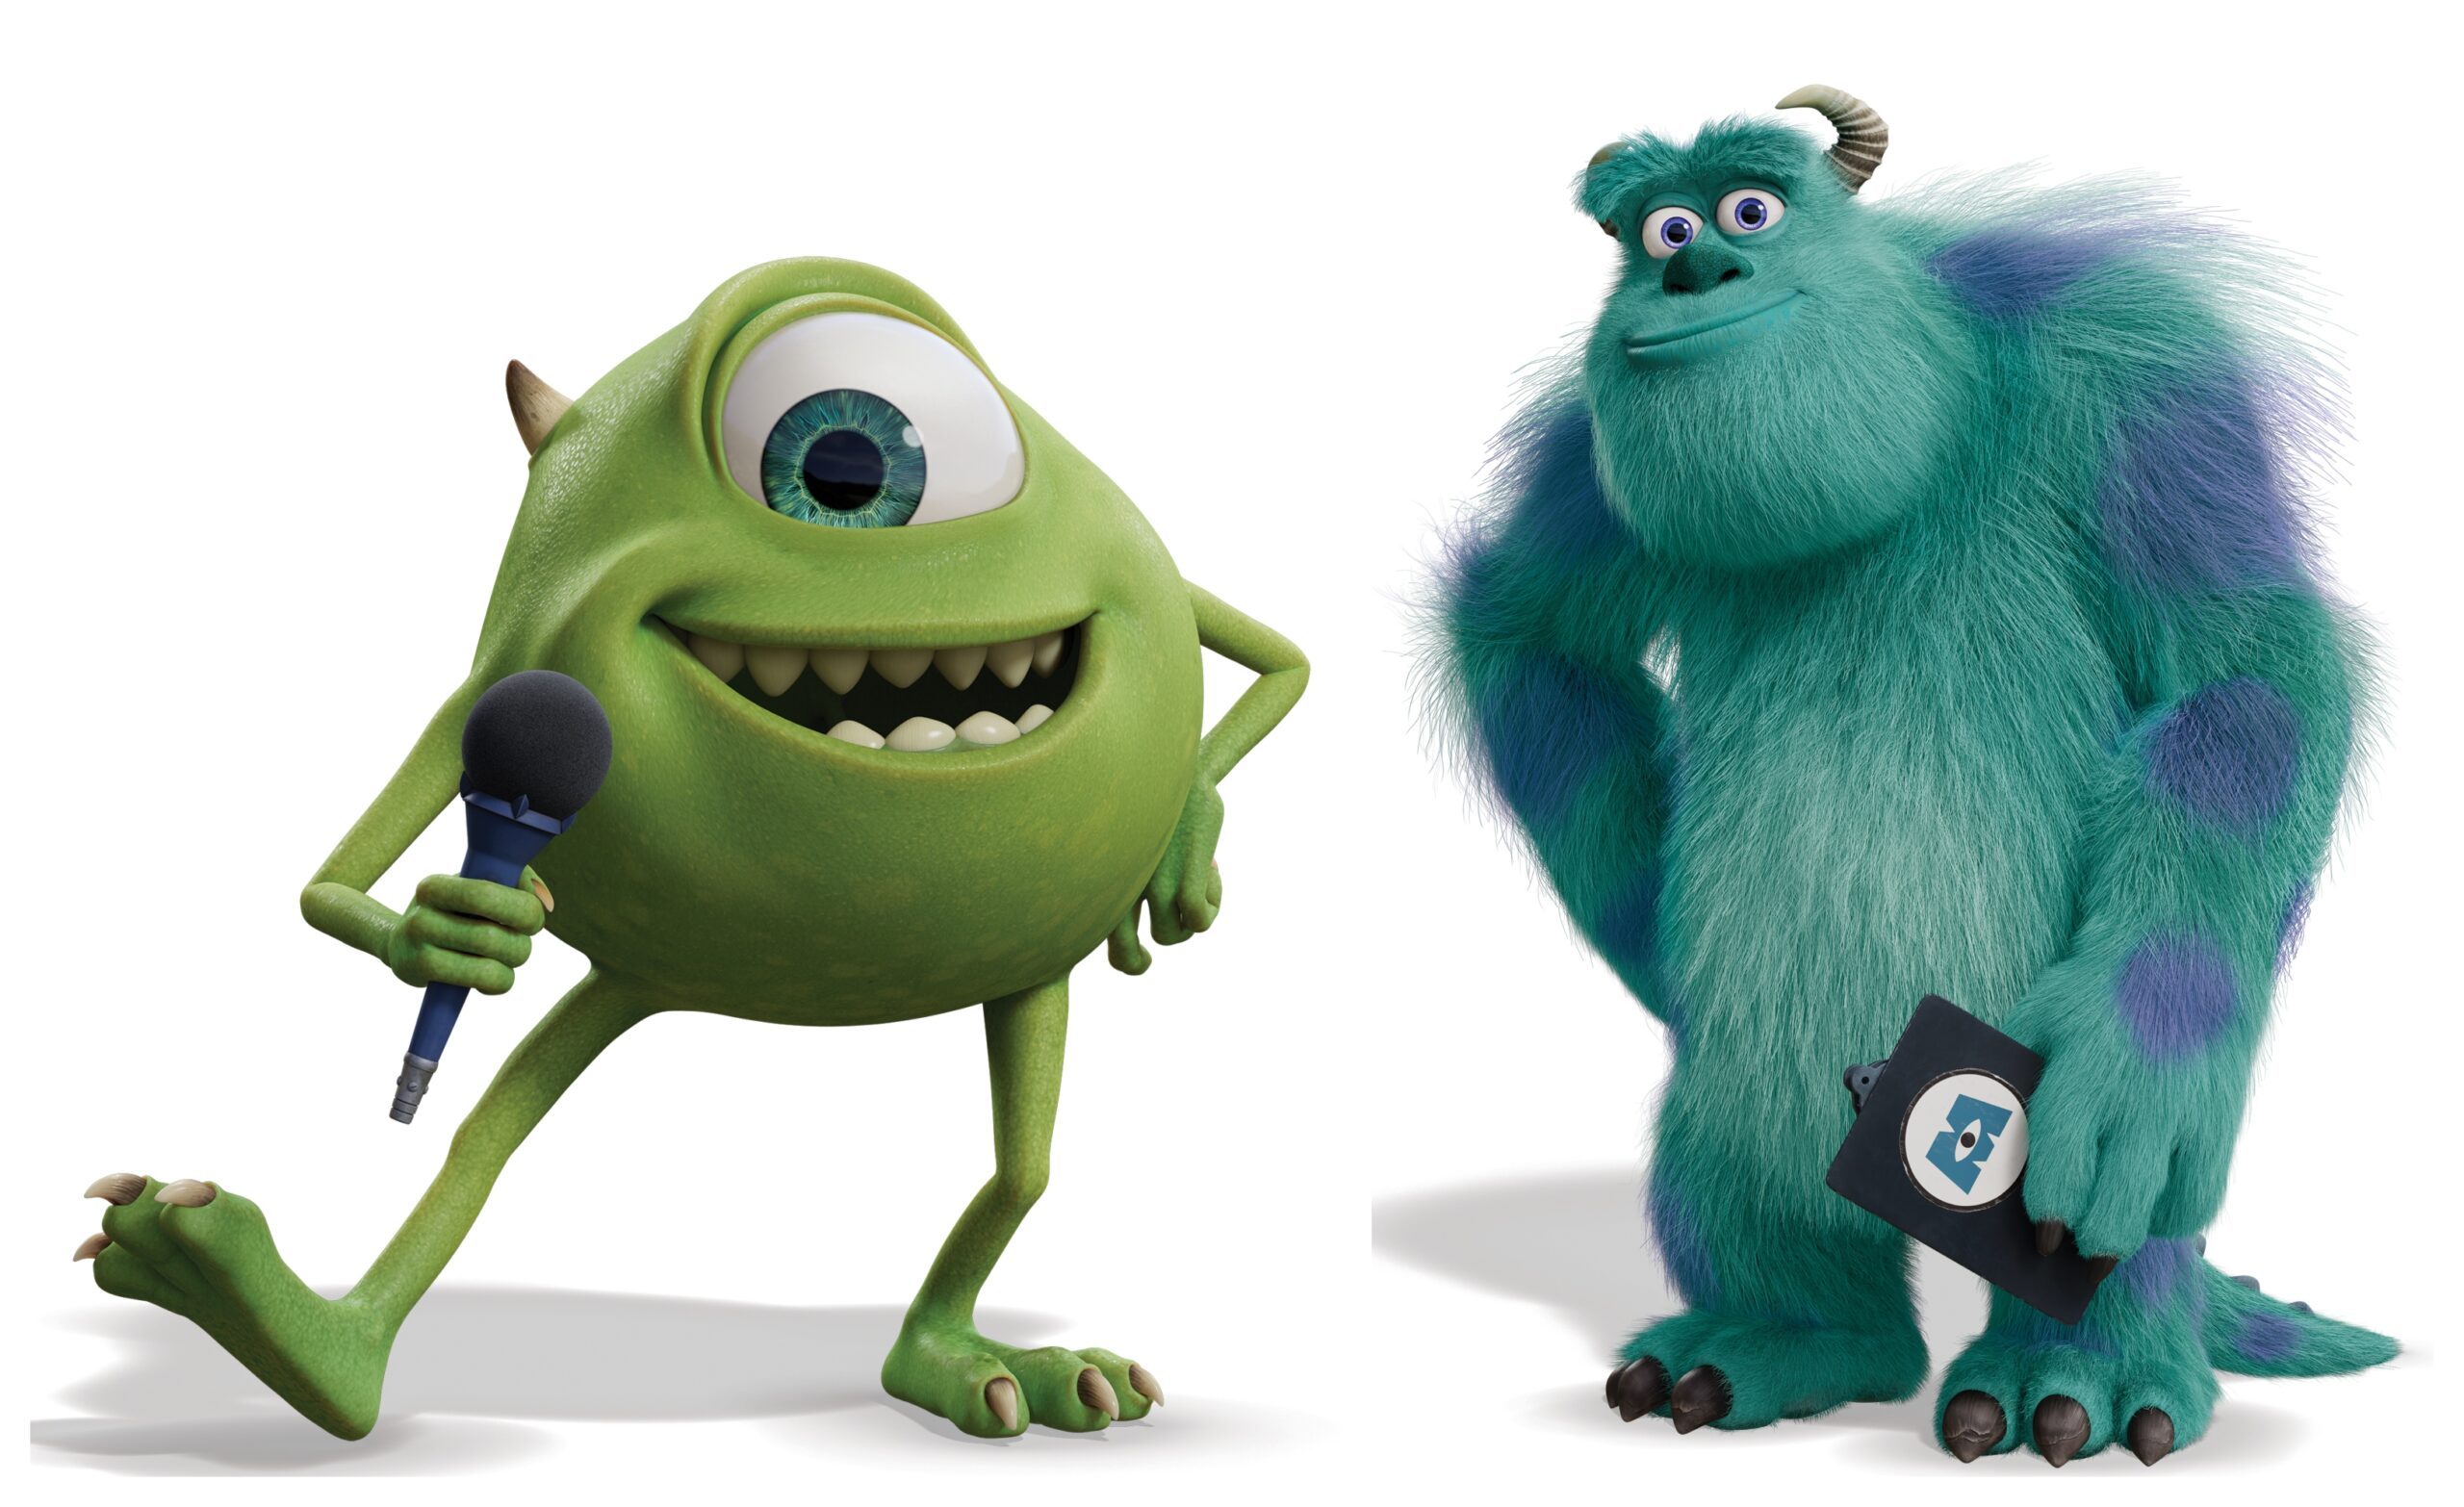 Meet the 'Monsters At Work' team in first look at the new Disney+ series